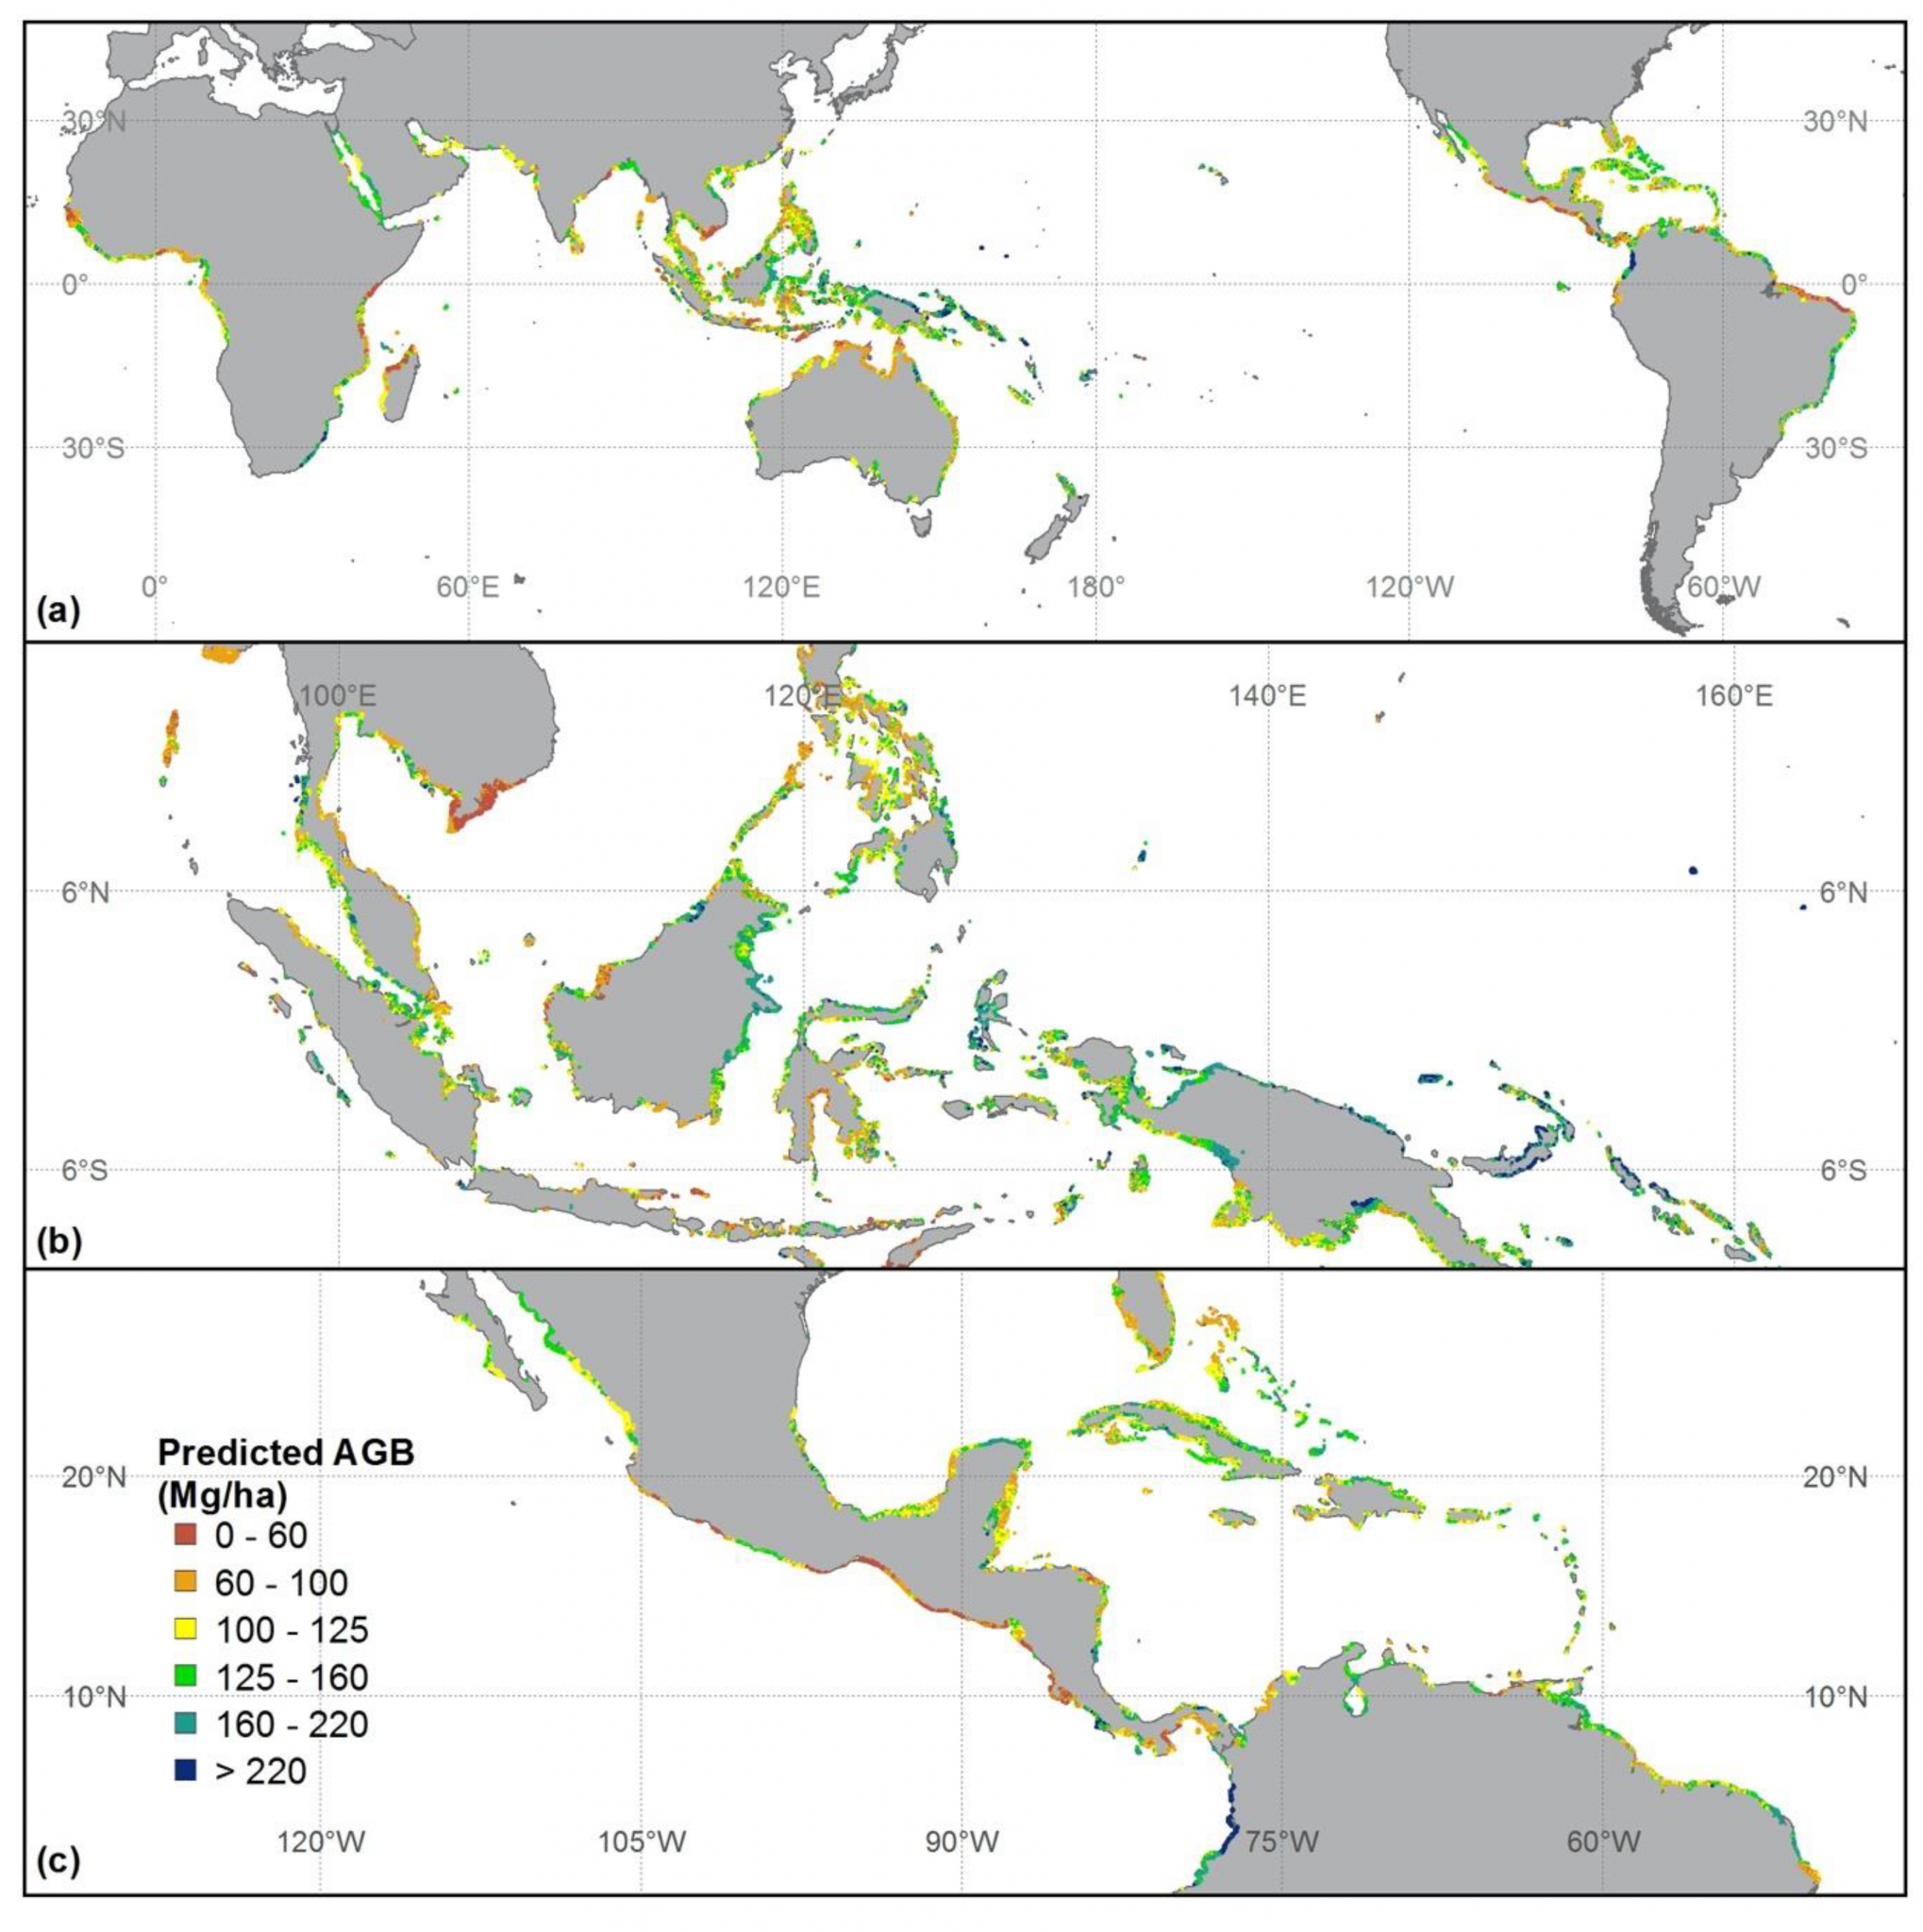 Global mangrove forest AGB map